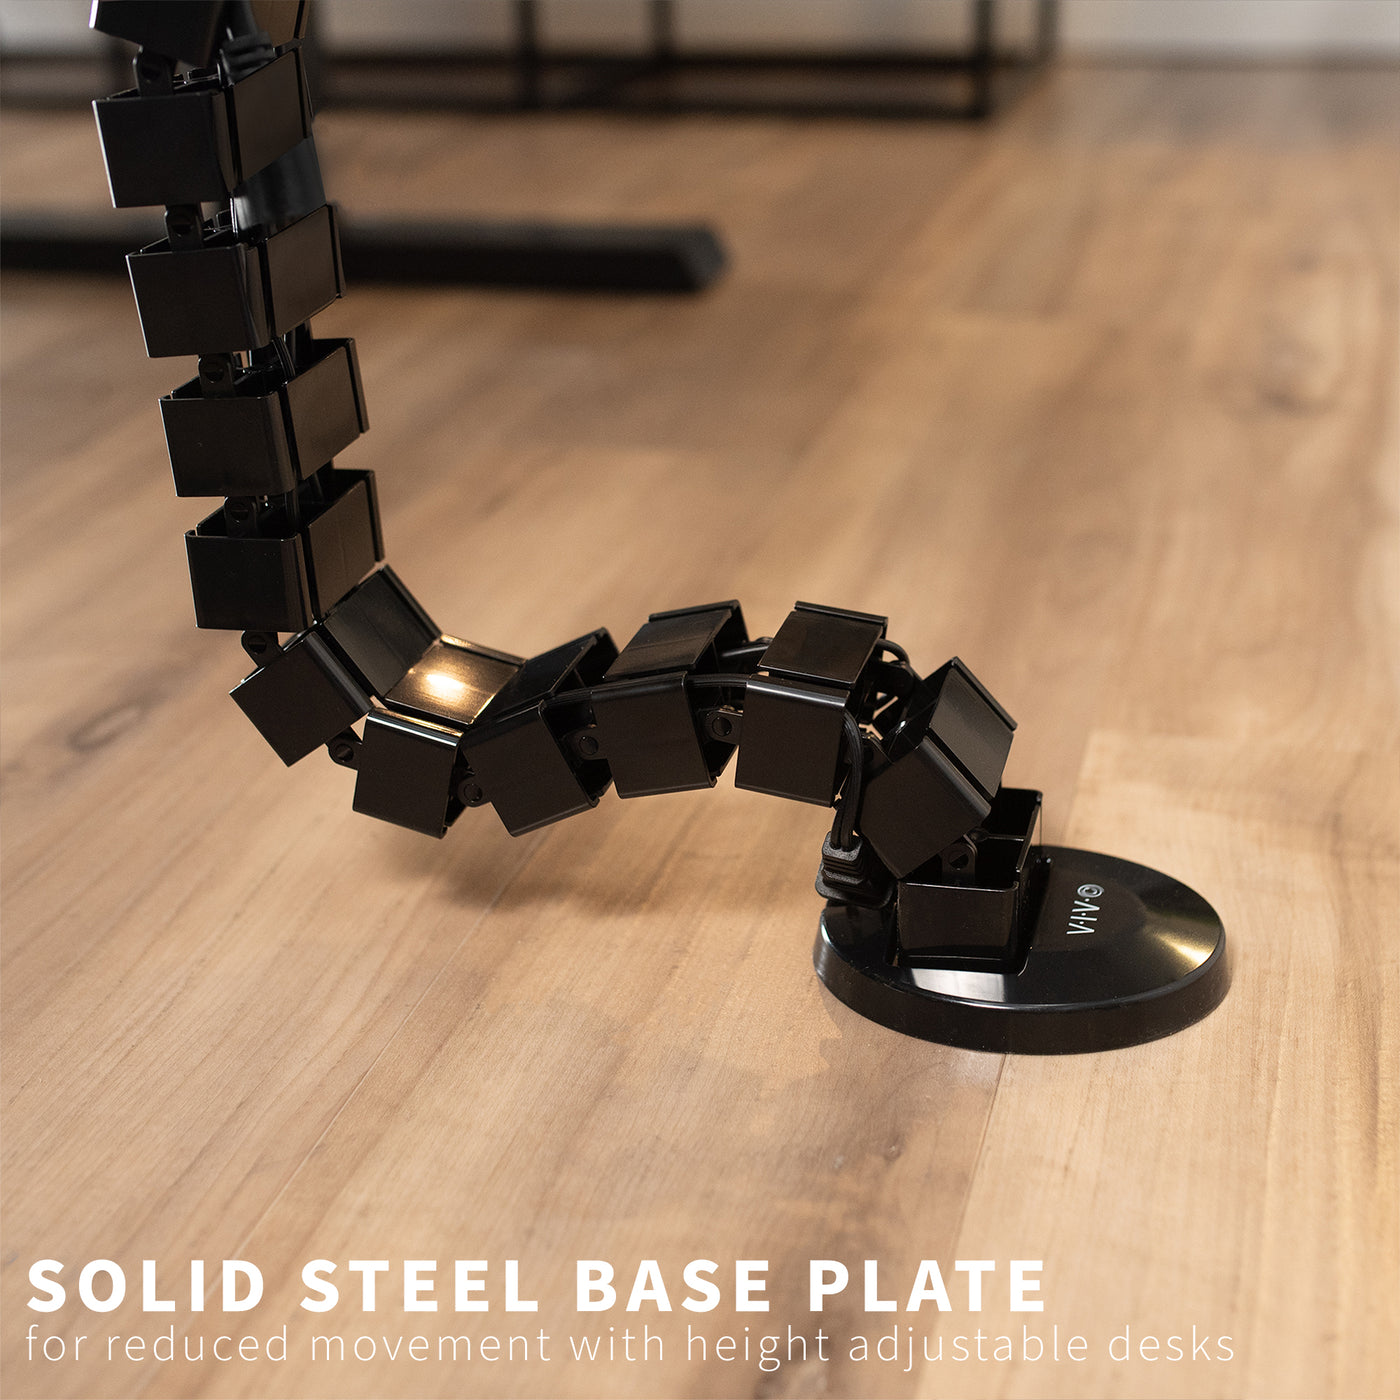 Clamp-on vertebrae cable management for desk with sturdy steel base.